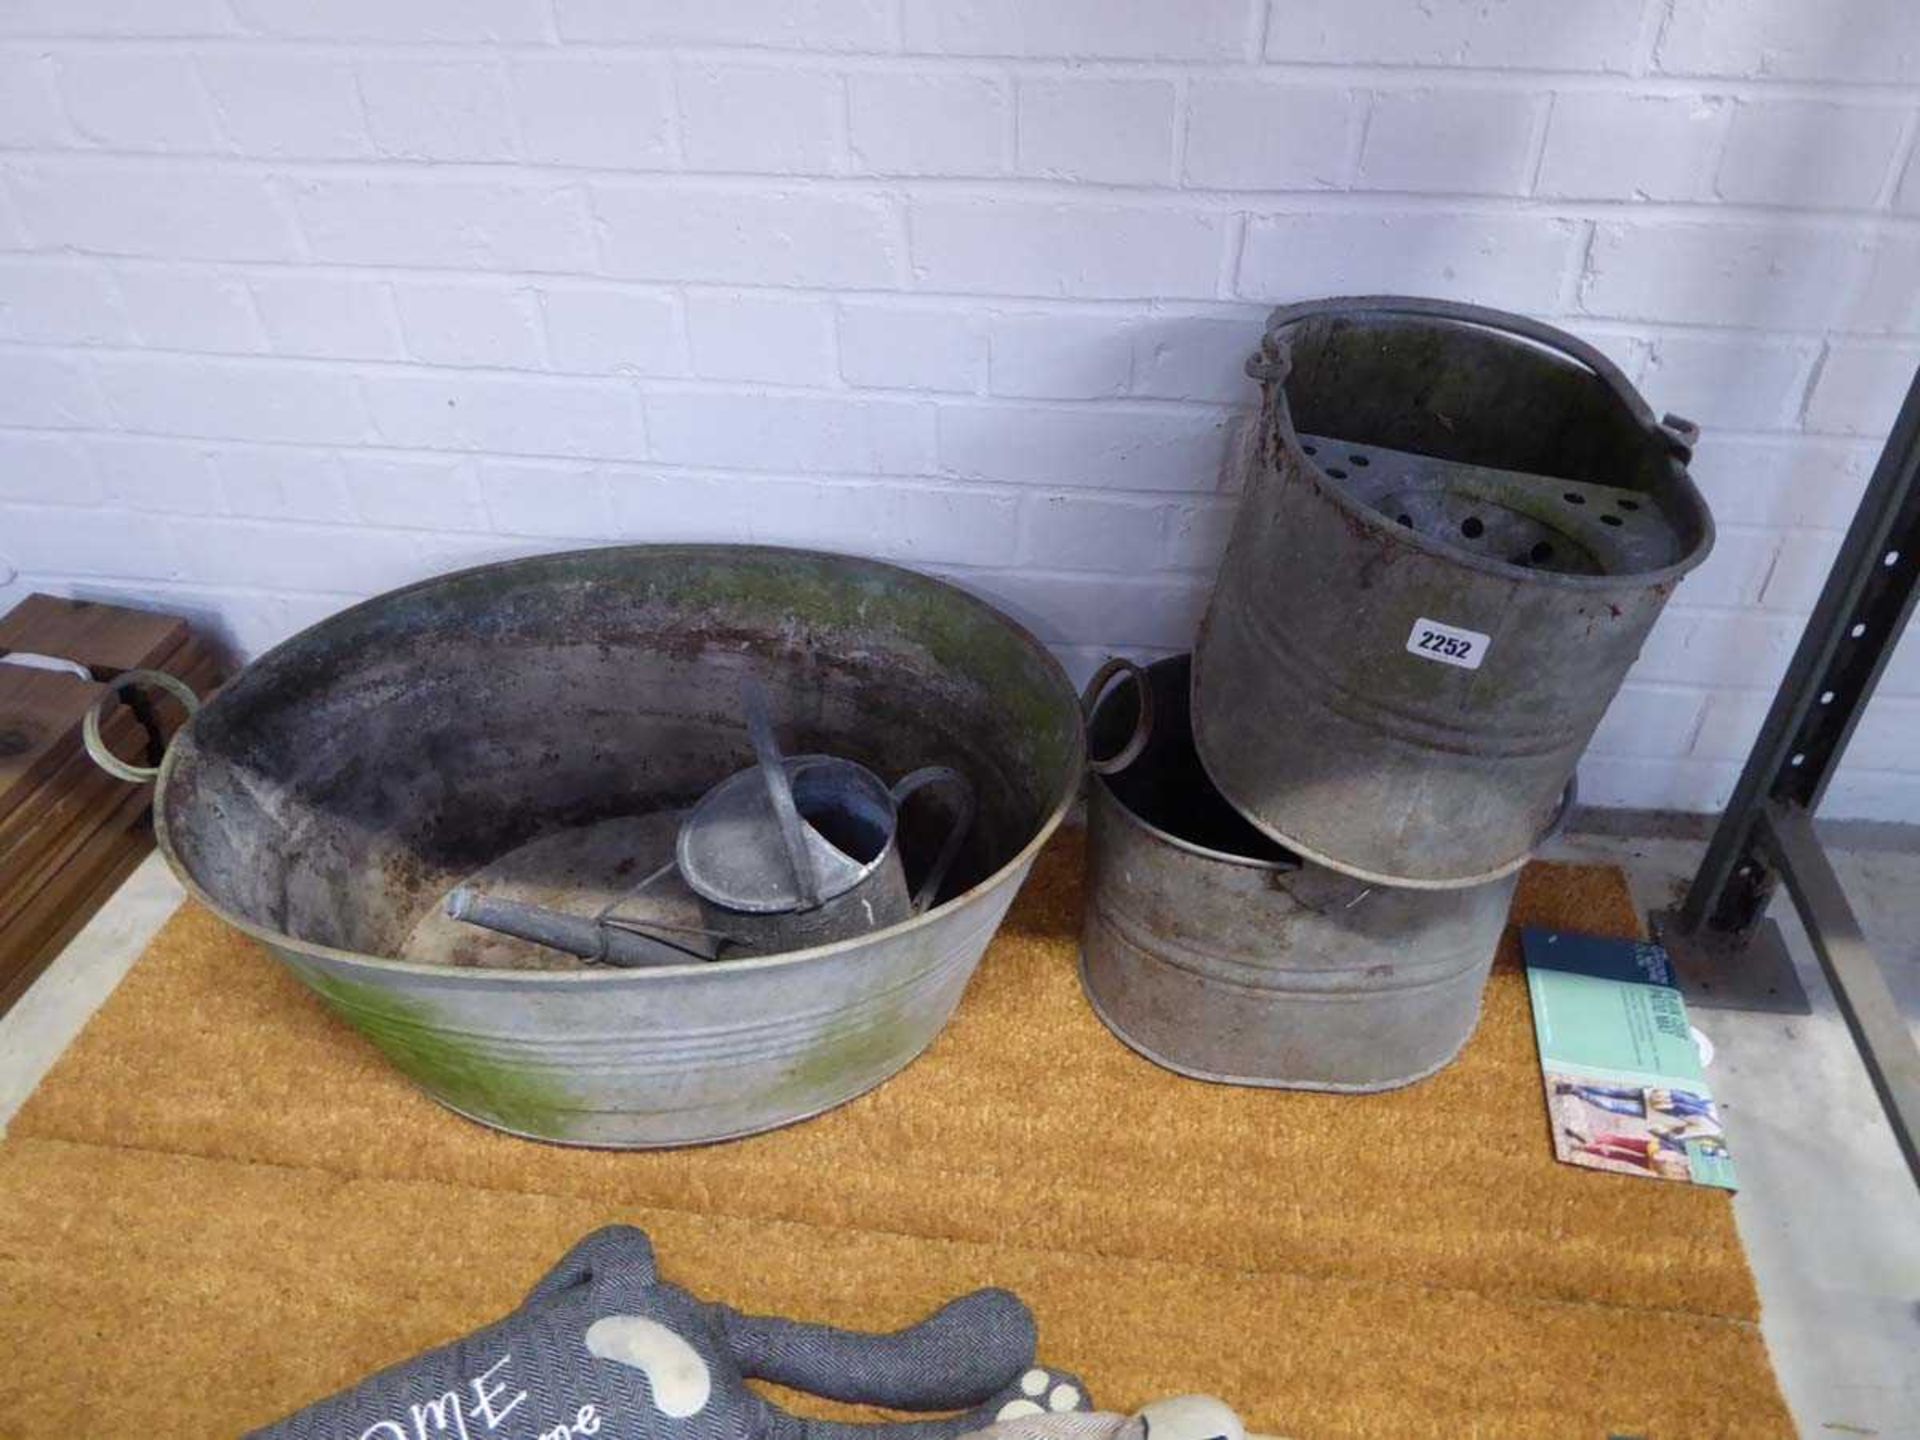 Galvanised twin handled tub with galvanised watering can and 2 galvanised mop buckets